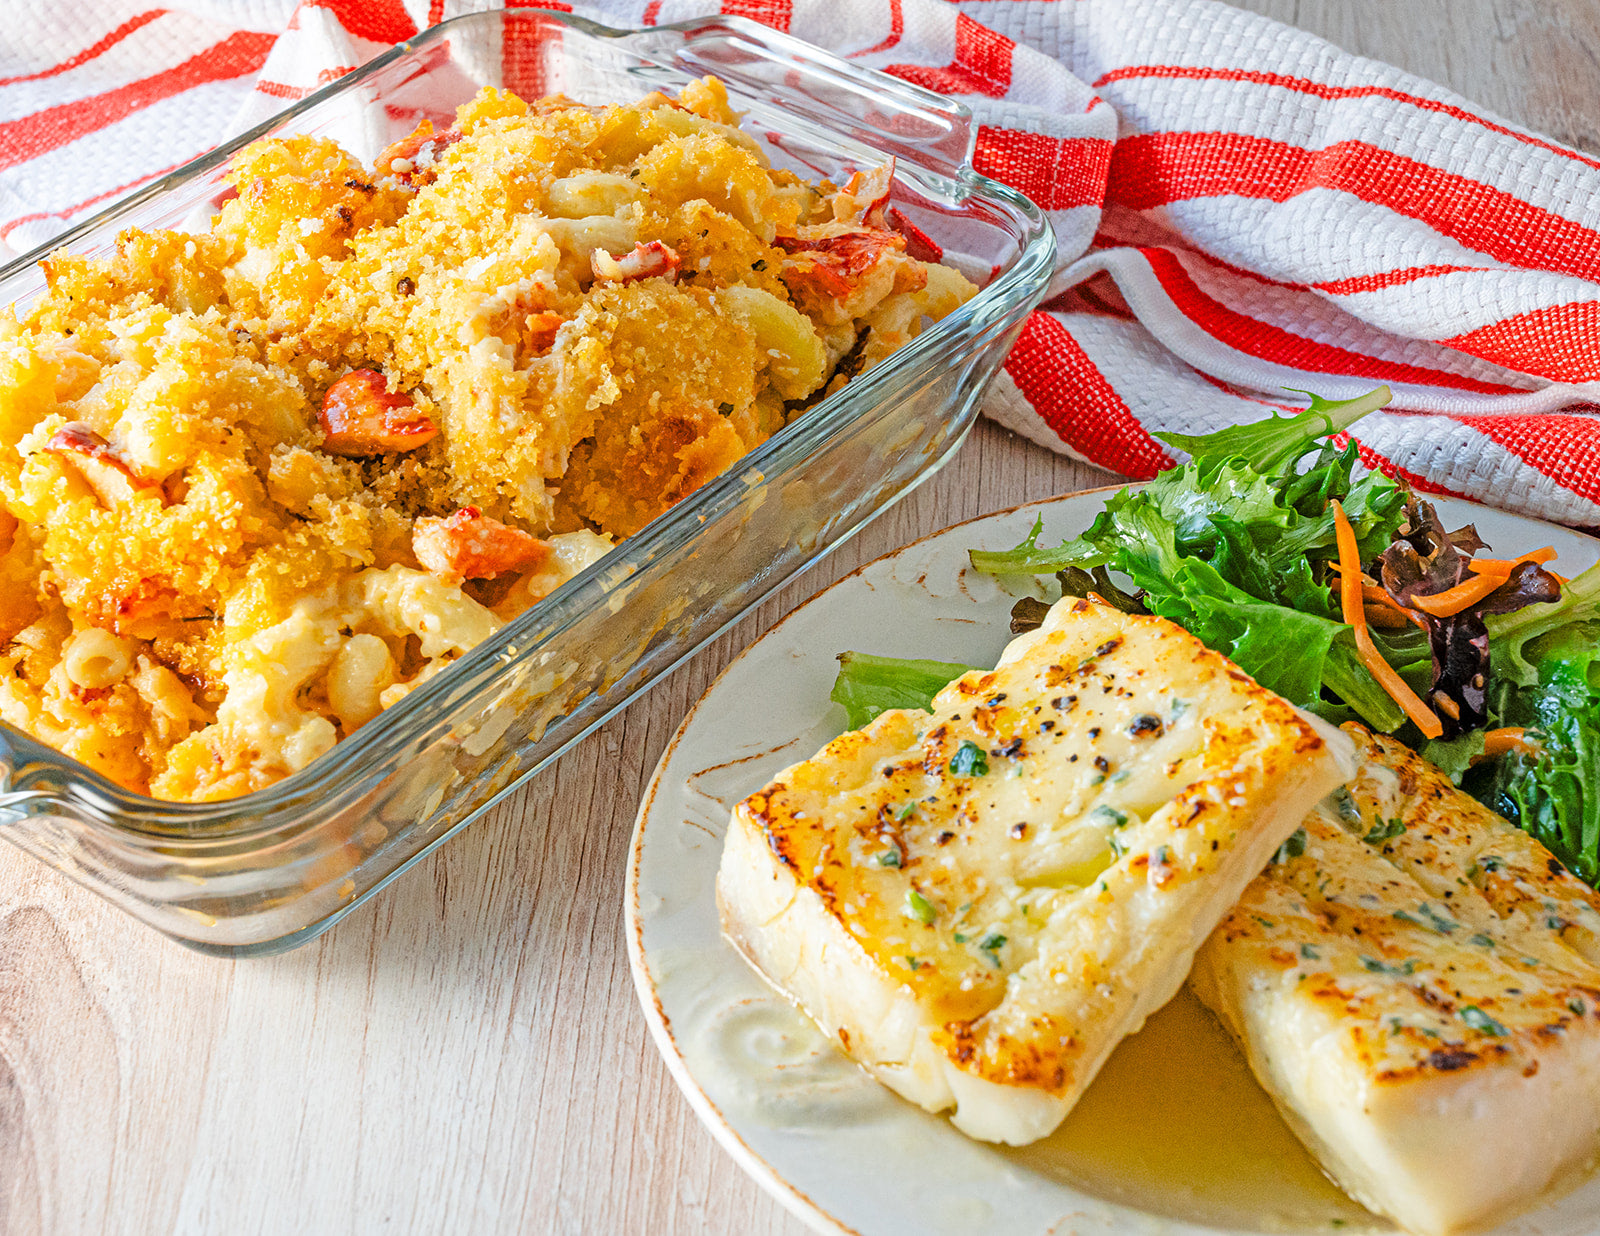 Garlic herb cod and mac and cheese with salad